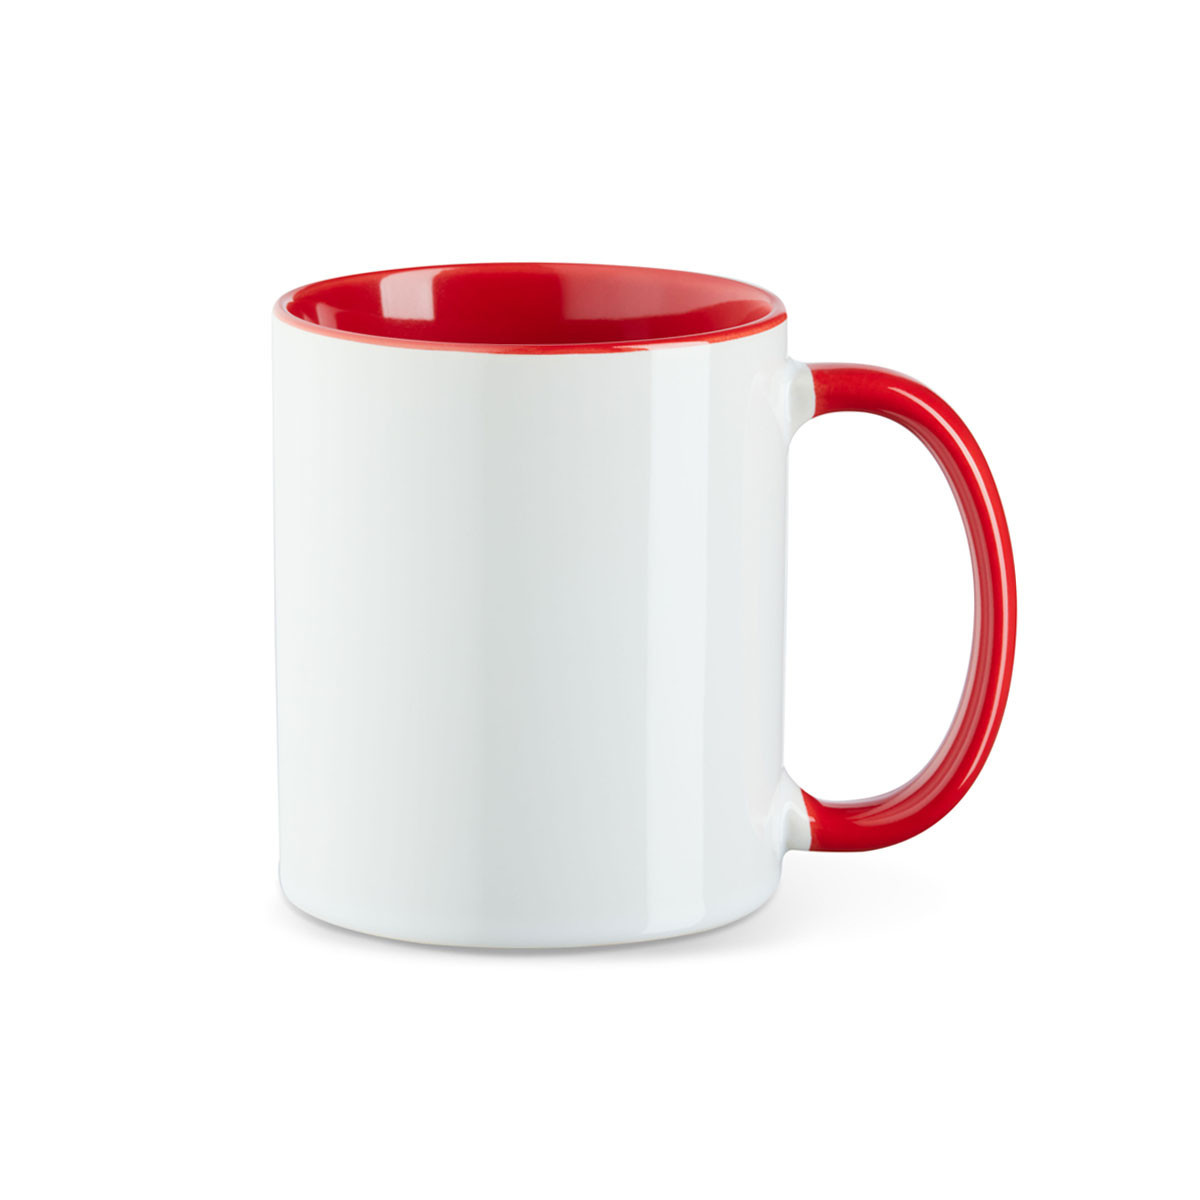  Sublitasse Intone rot, 11 oz in Farbe wei?/rot